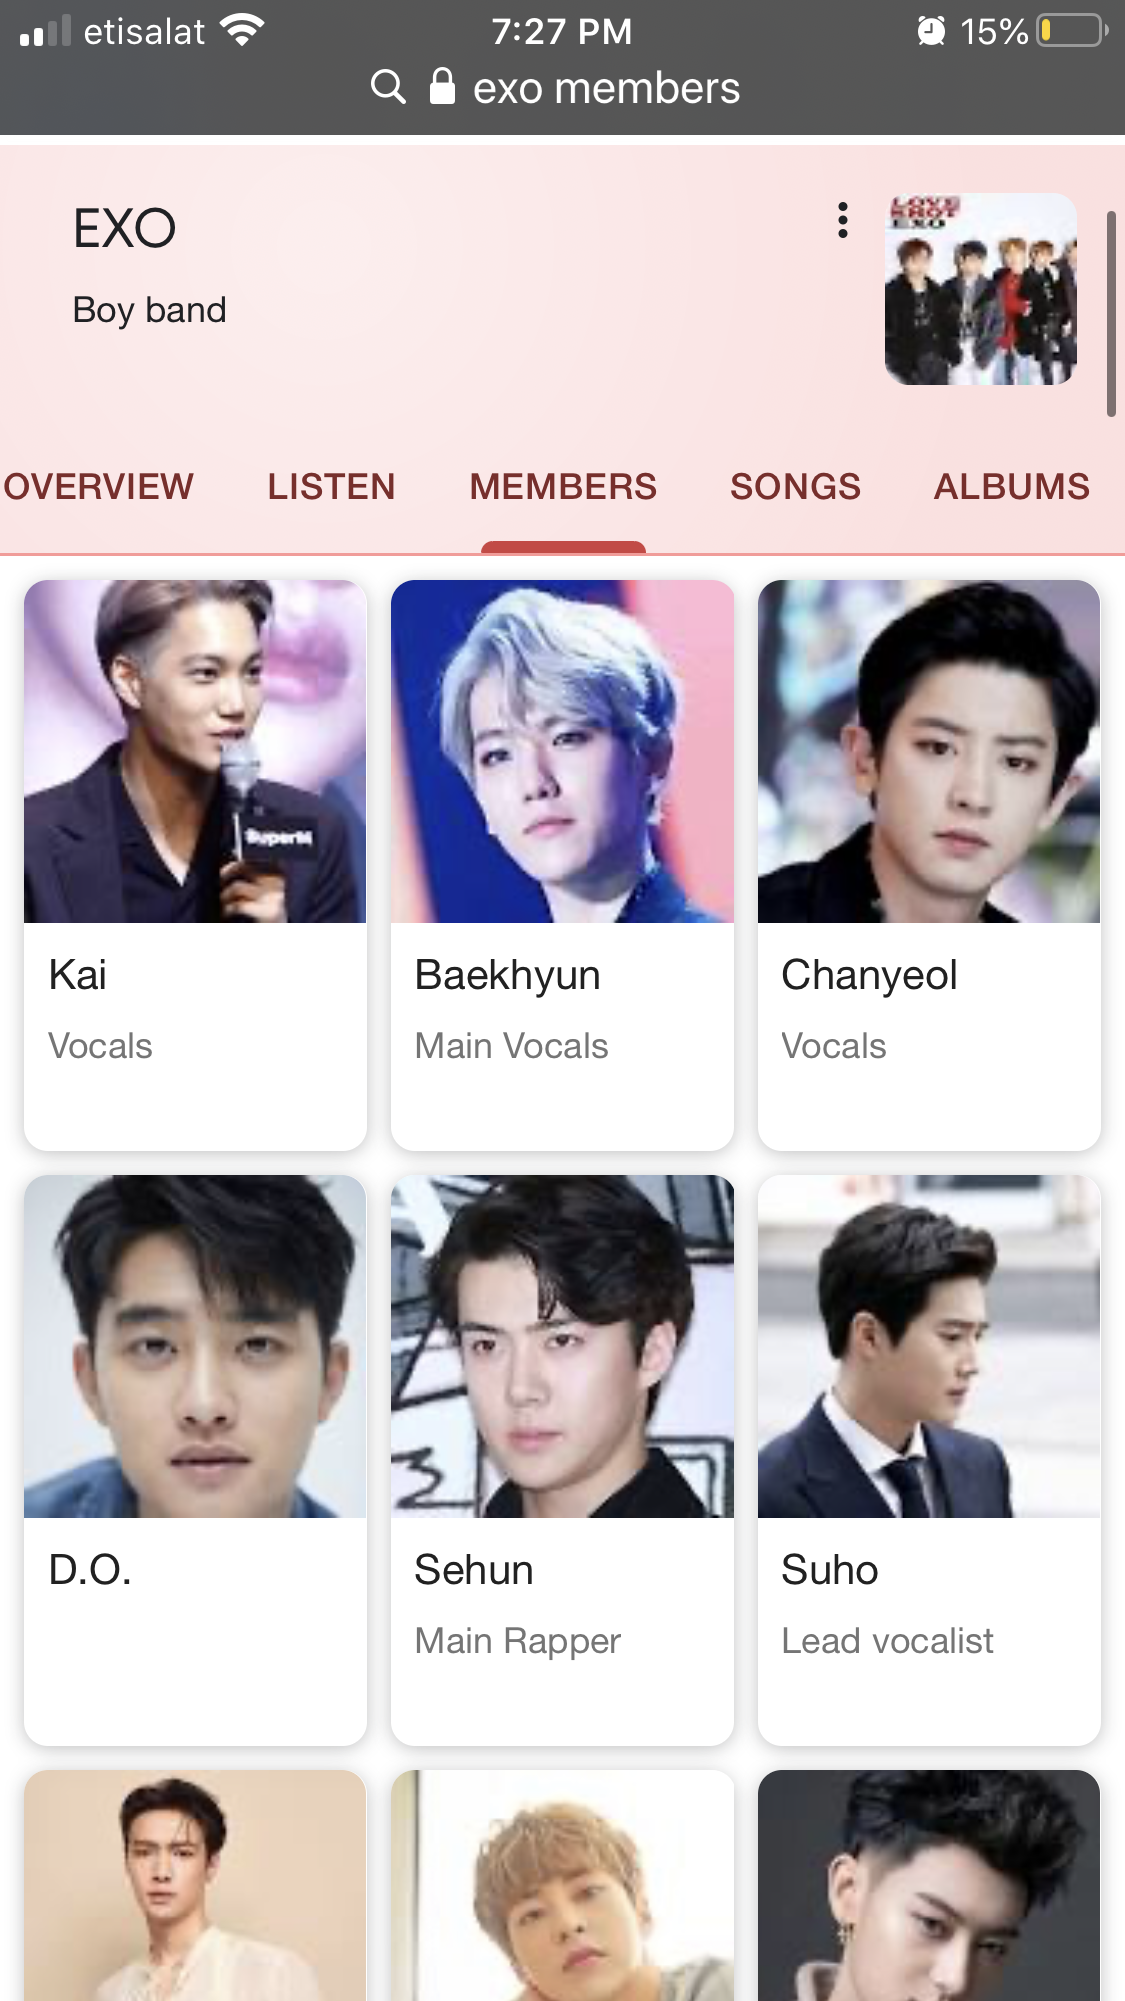 Please Get Member Chen From Exo On The List Of Members Again It Shows On The Google Search Google Search Community